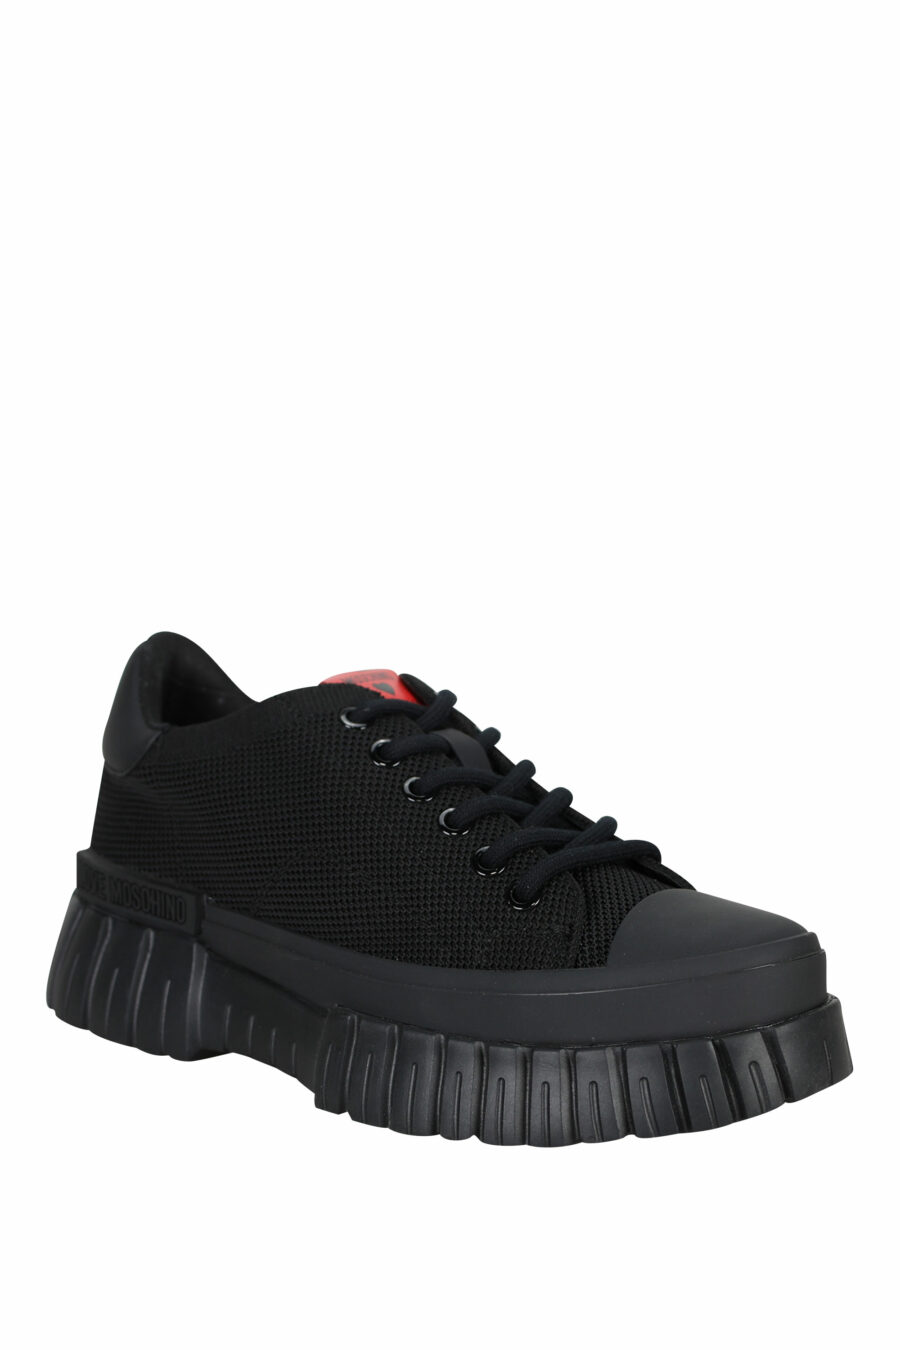 Black mix trainers with logo - 8054653167971 1